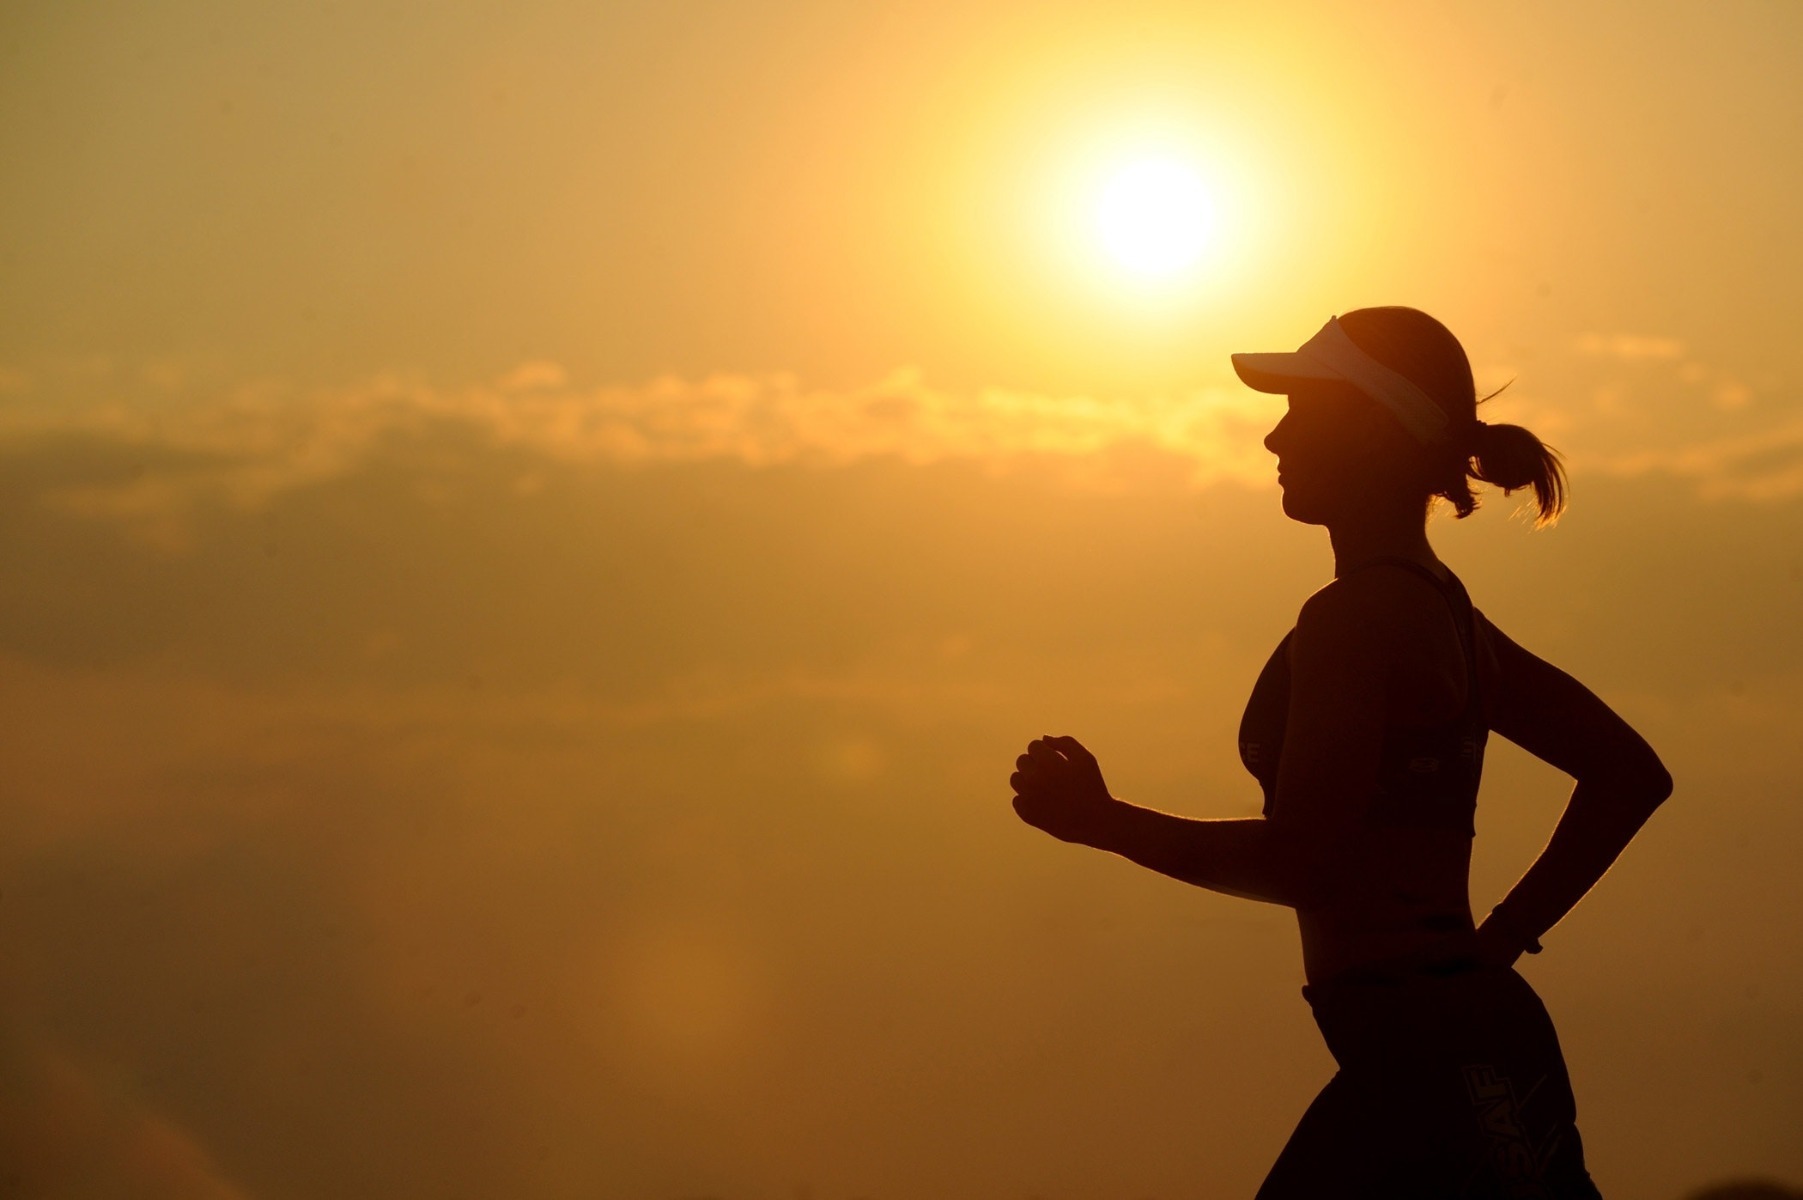 Ways to Destress: Woman doing exercise shown in silhouette